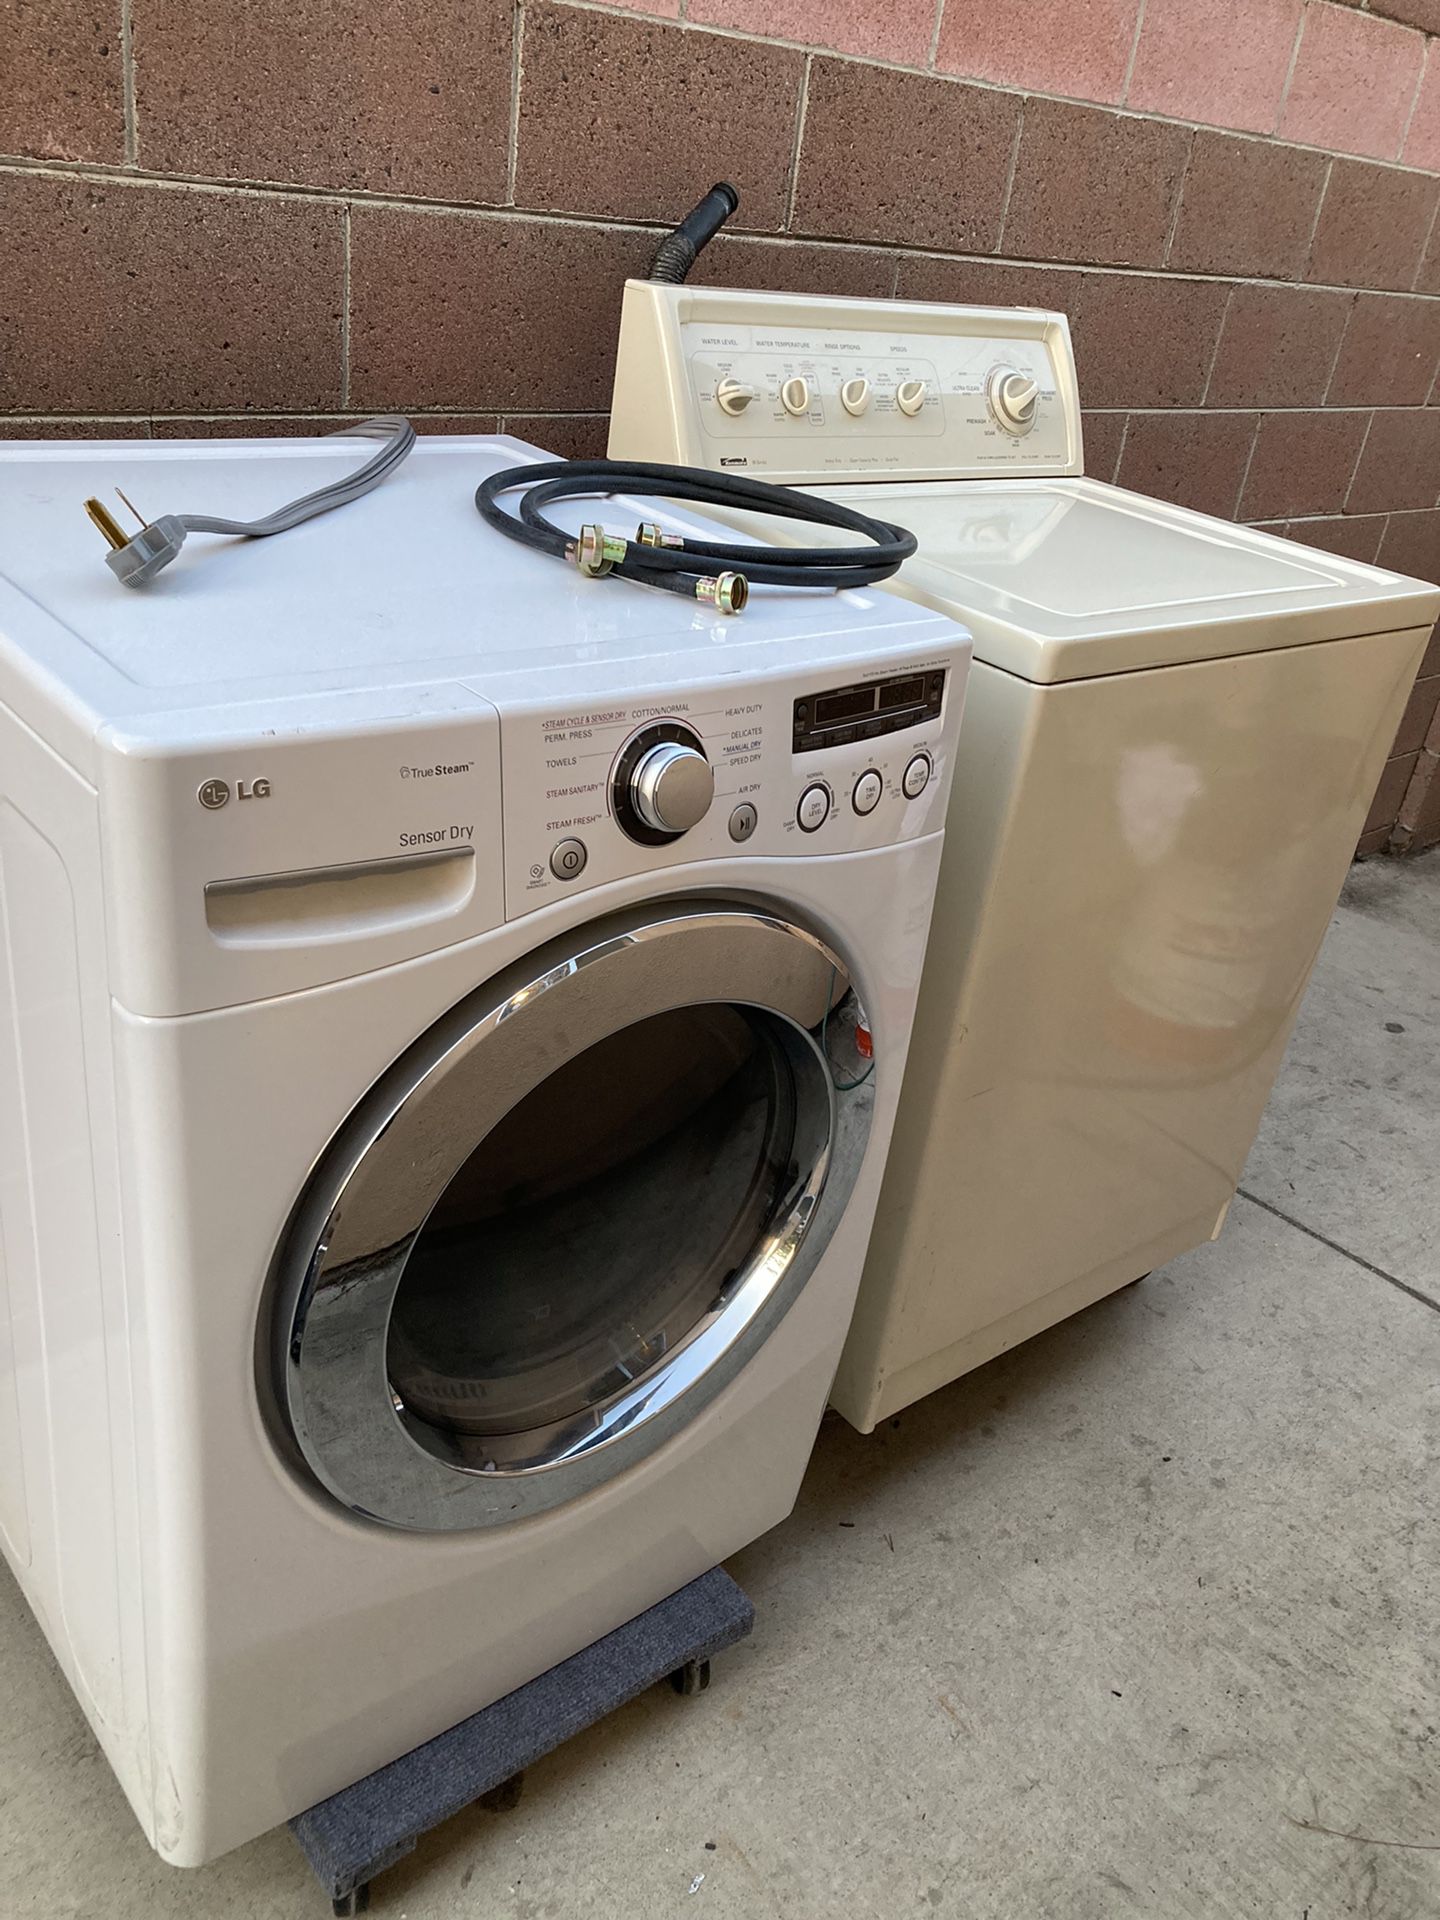 LG Dryer 220 Volts Kenmore Washer 110 Volts 